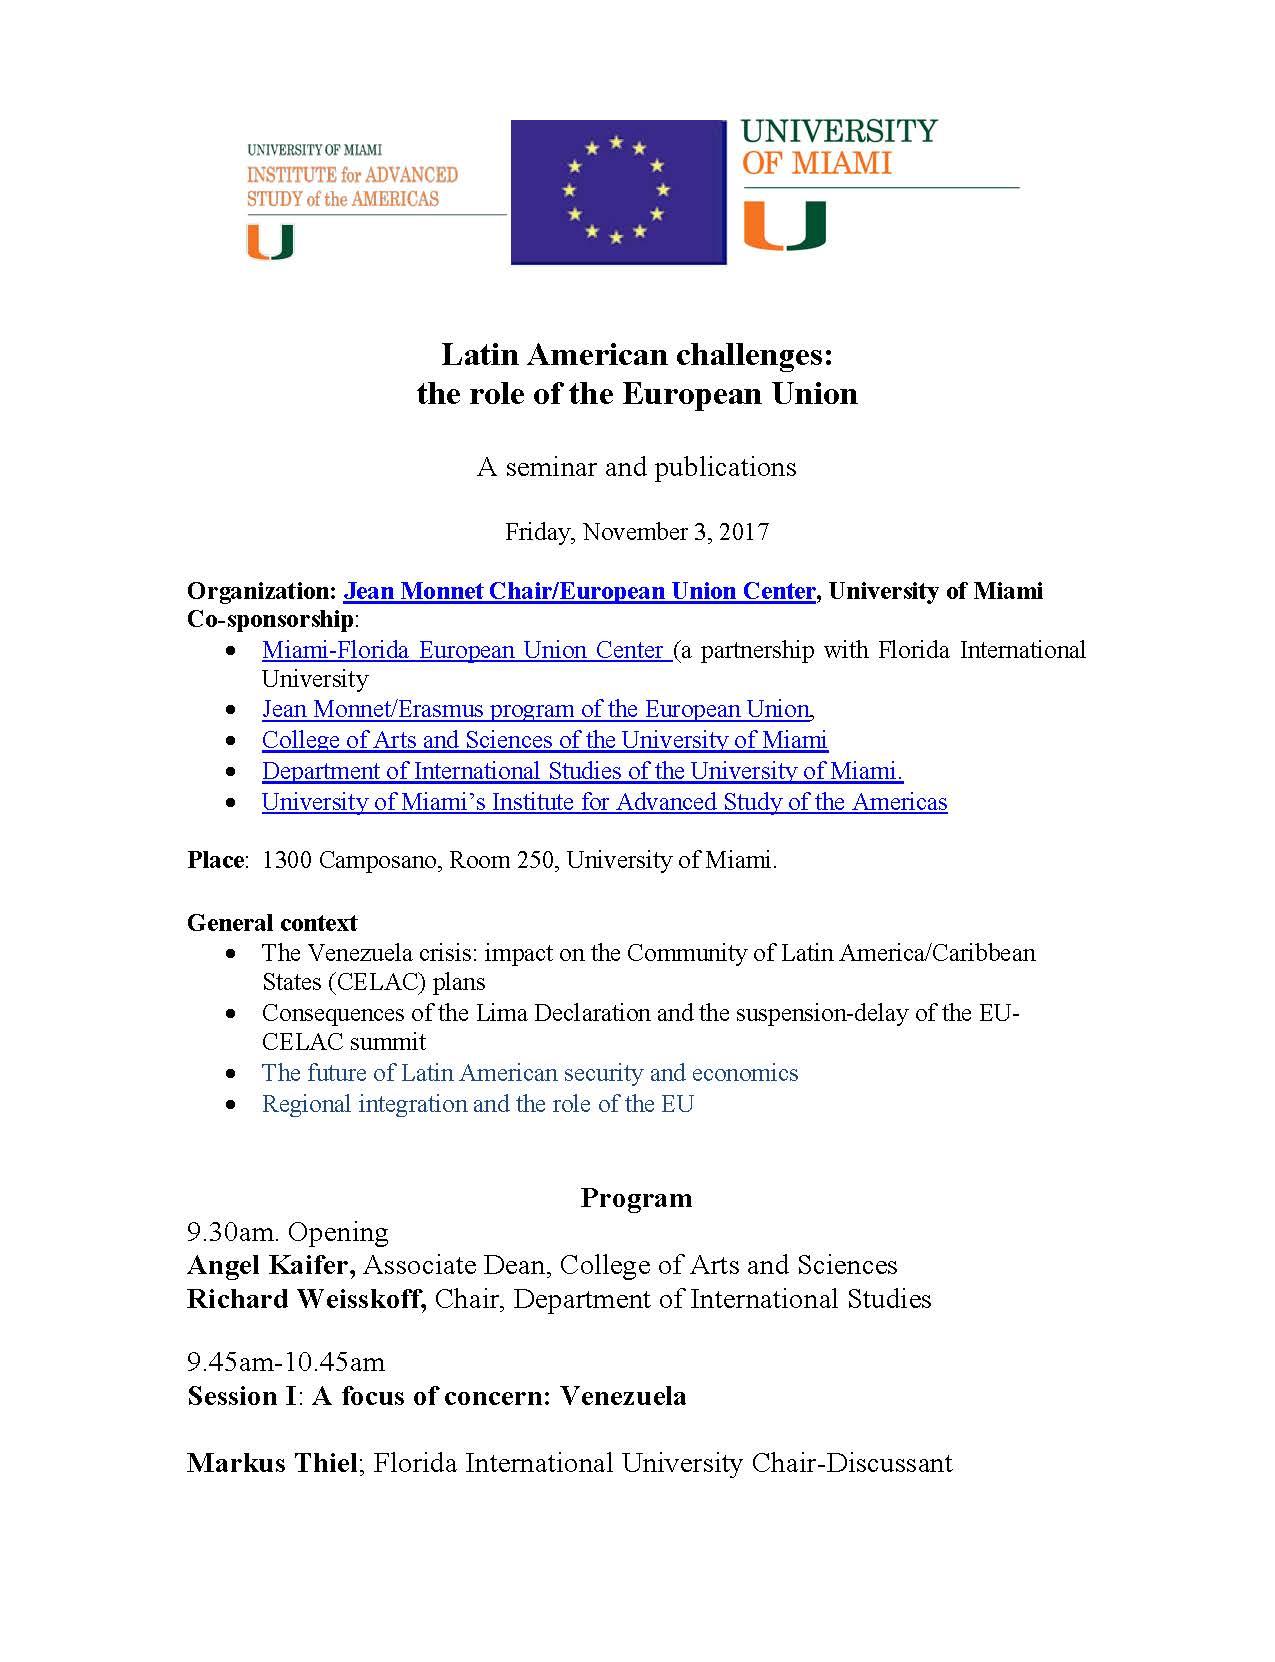 Latin American challenges: the role of the European Union"